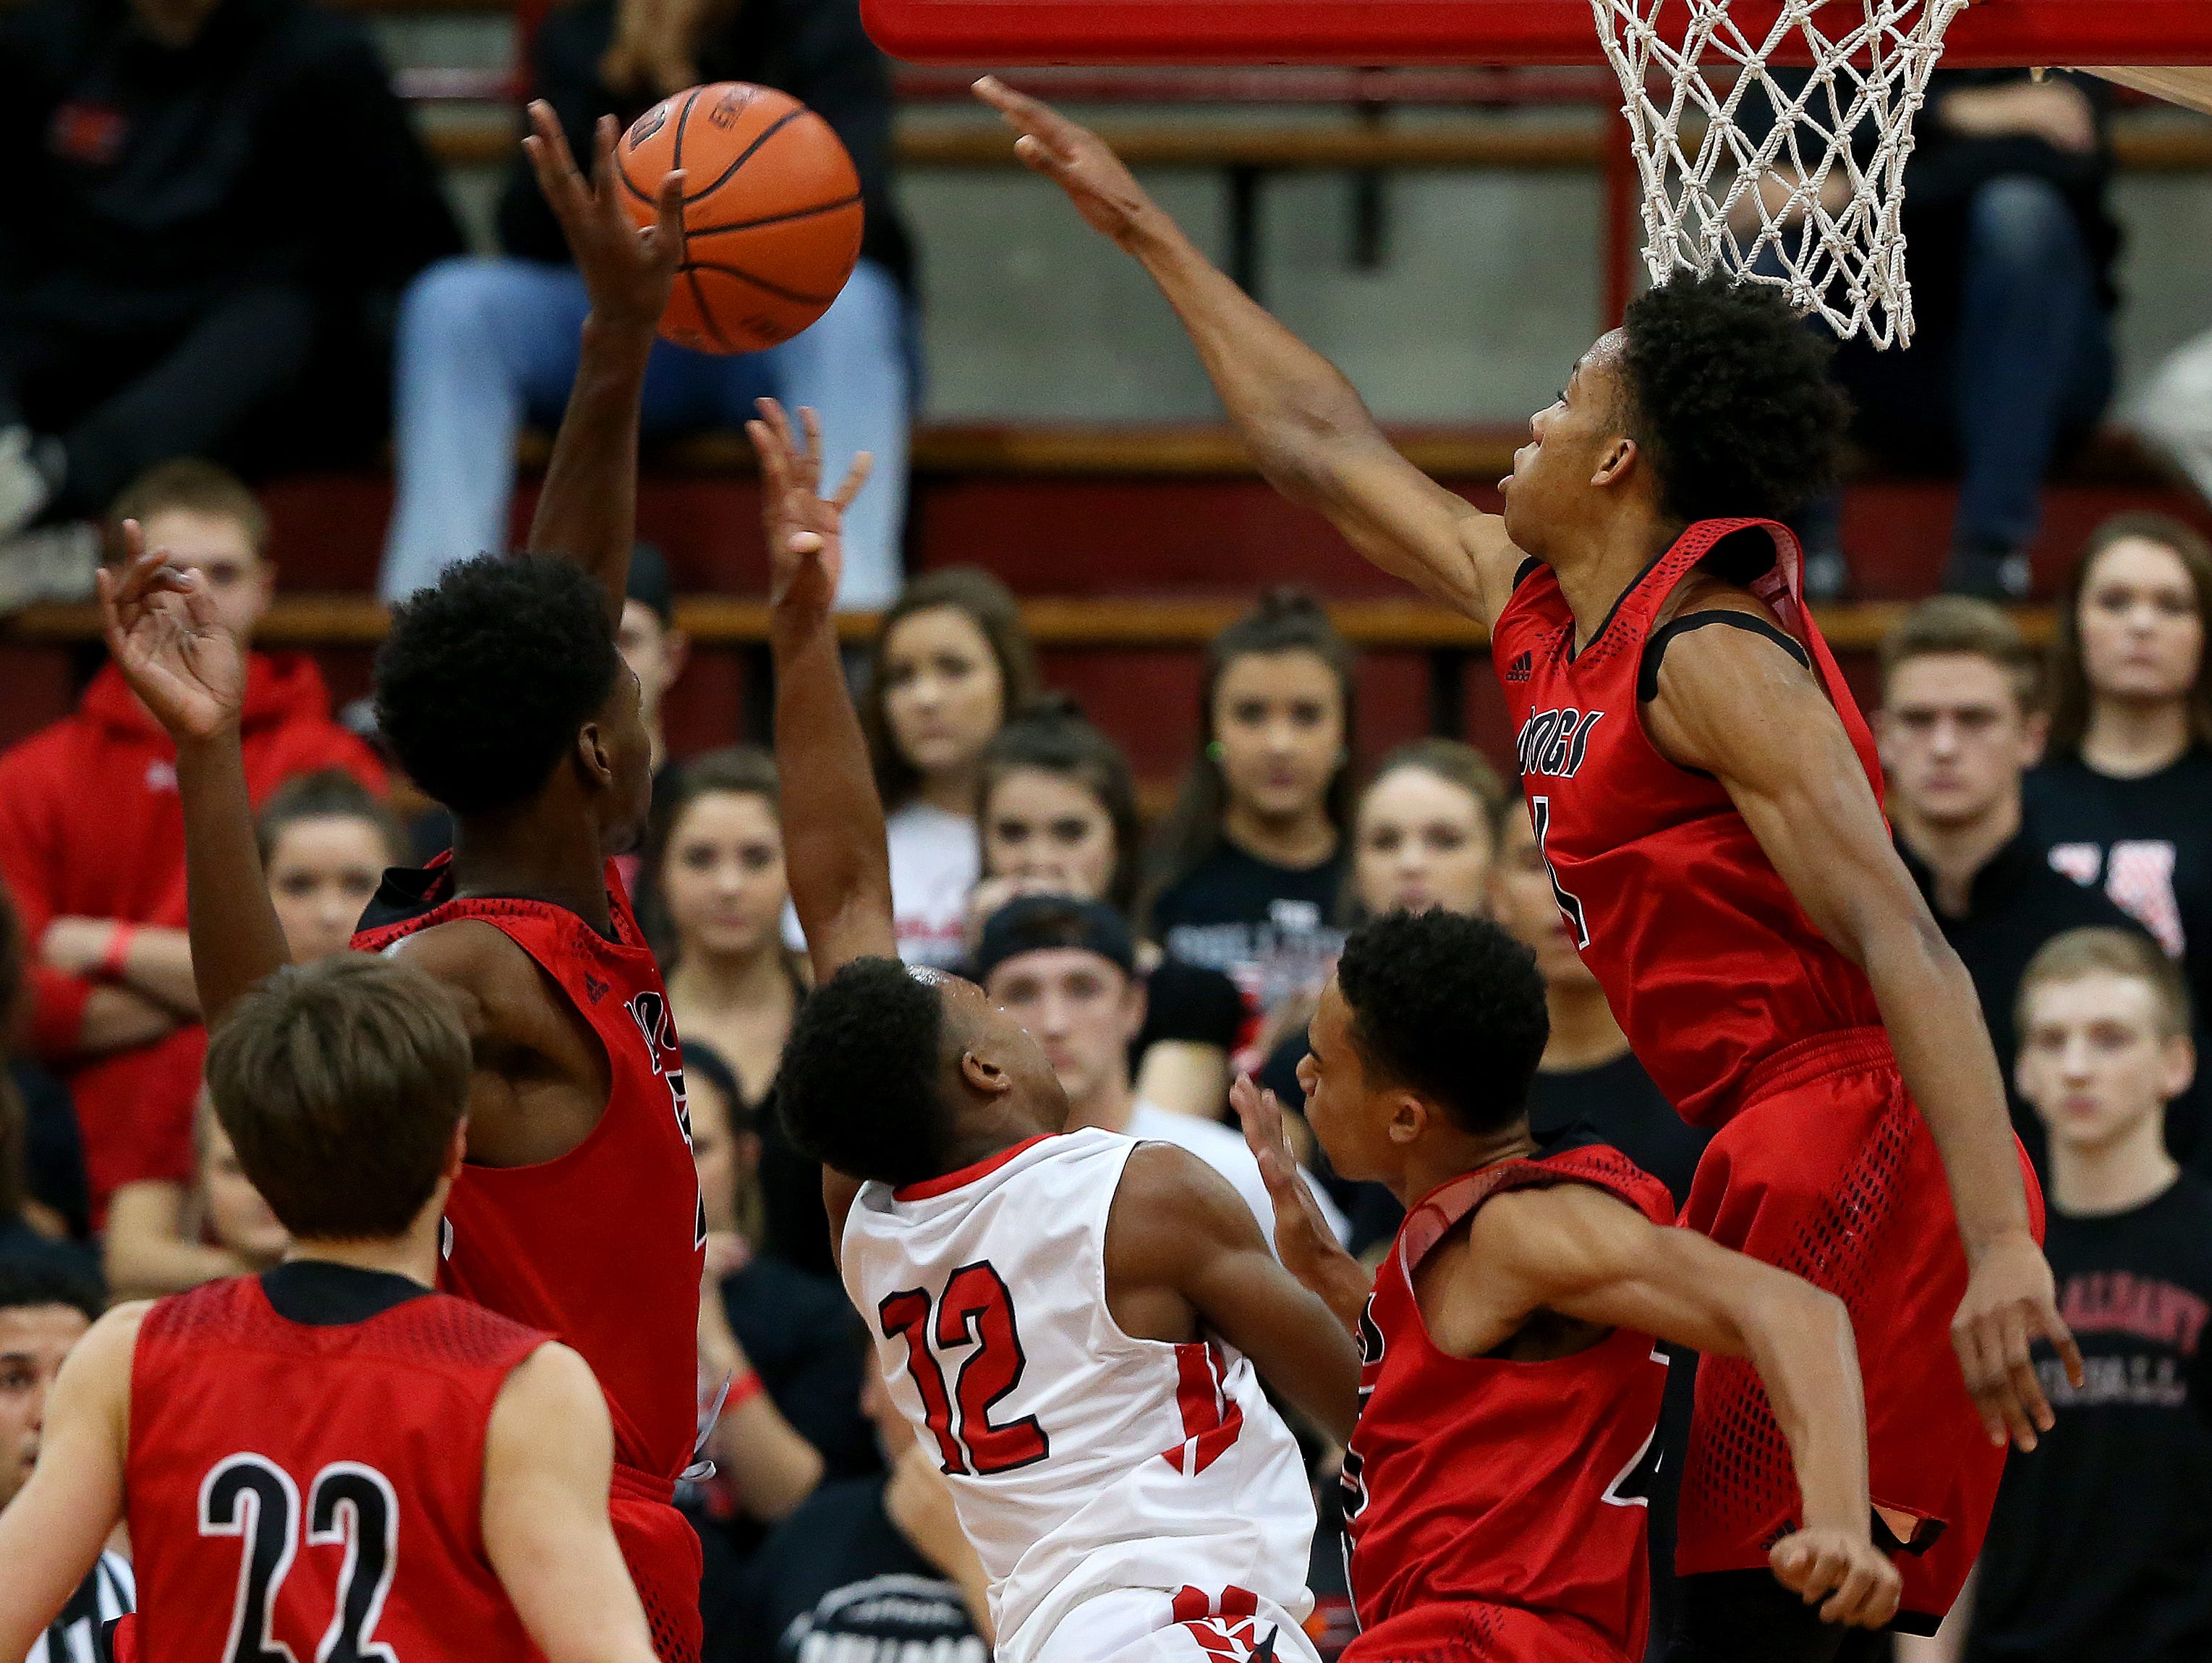 New Albany's Romeo Langford (right) blocked a shot by Pike's Justin Thomas (12) during the Tip Off Classic in December.